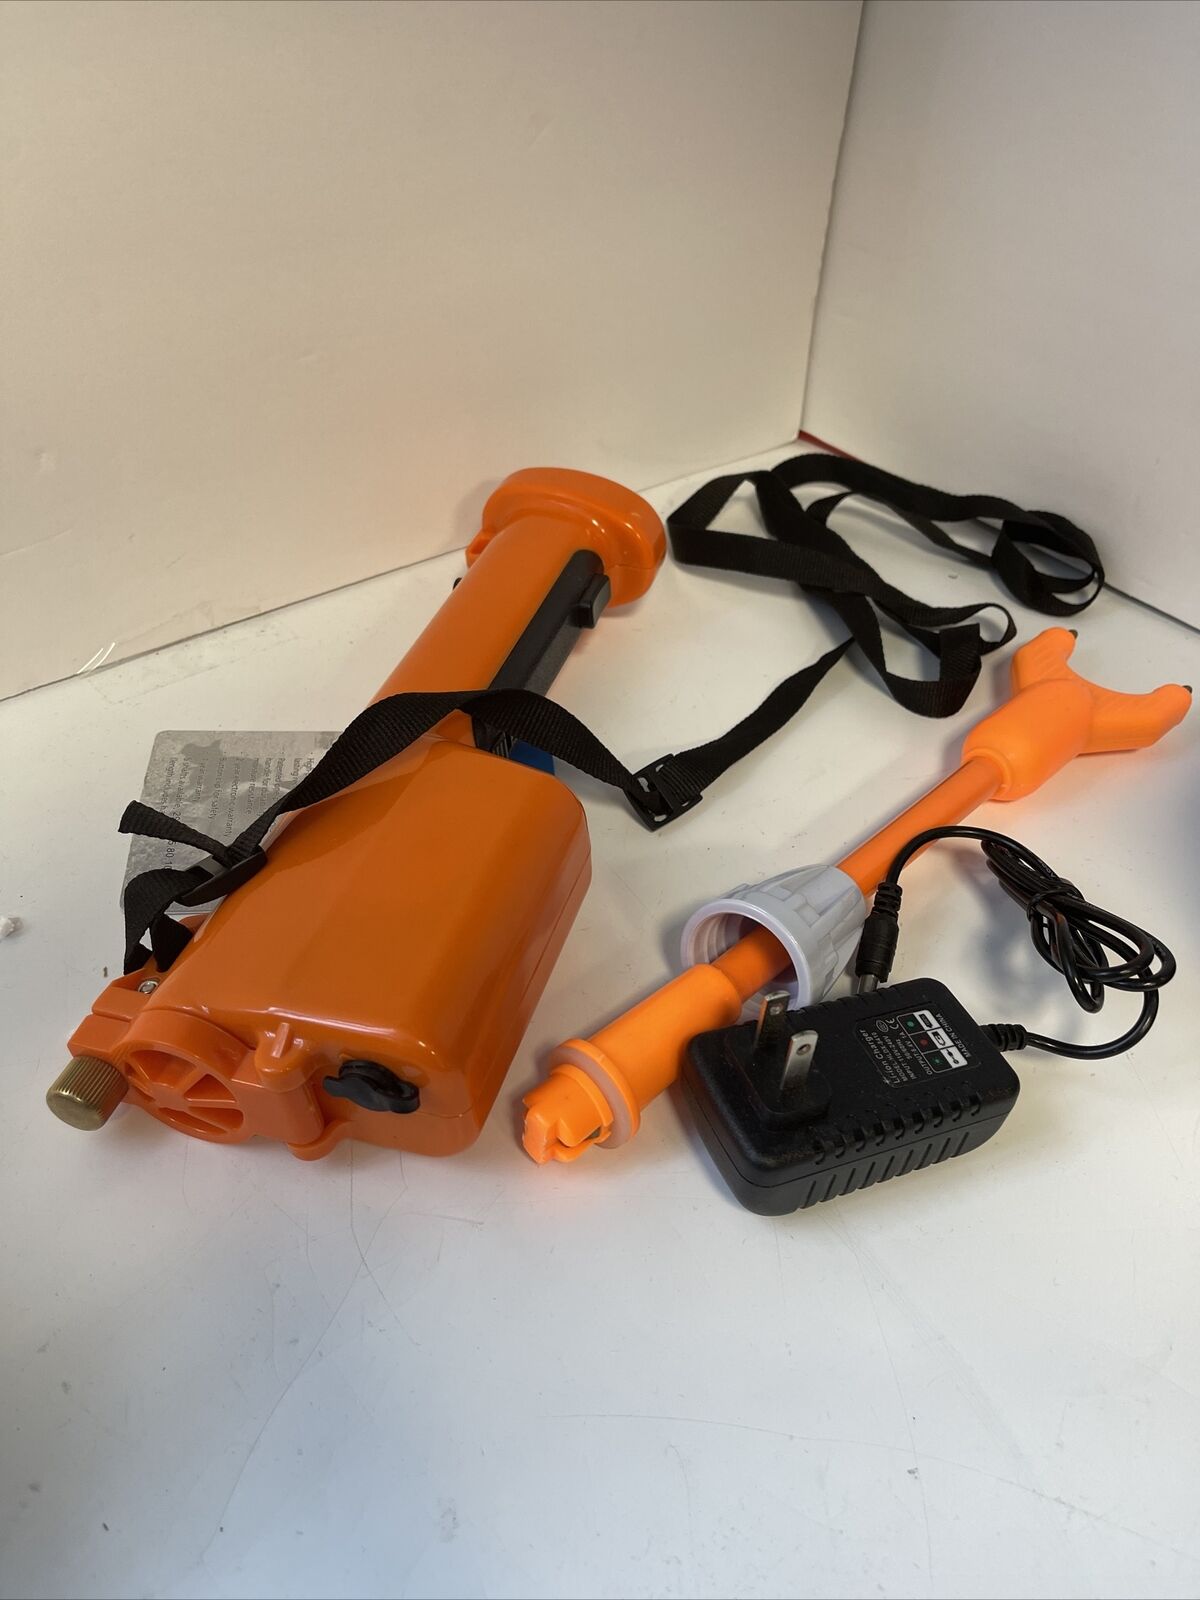 https://techno-tek.com/wp-content/uploads/imported/5/55/Livestock-Prod-Electric-Cattle-Prod-Rechargeable-Animal-Hot-Shot-Tool-Safety-New-115866422855-4.jpg